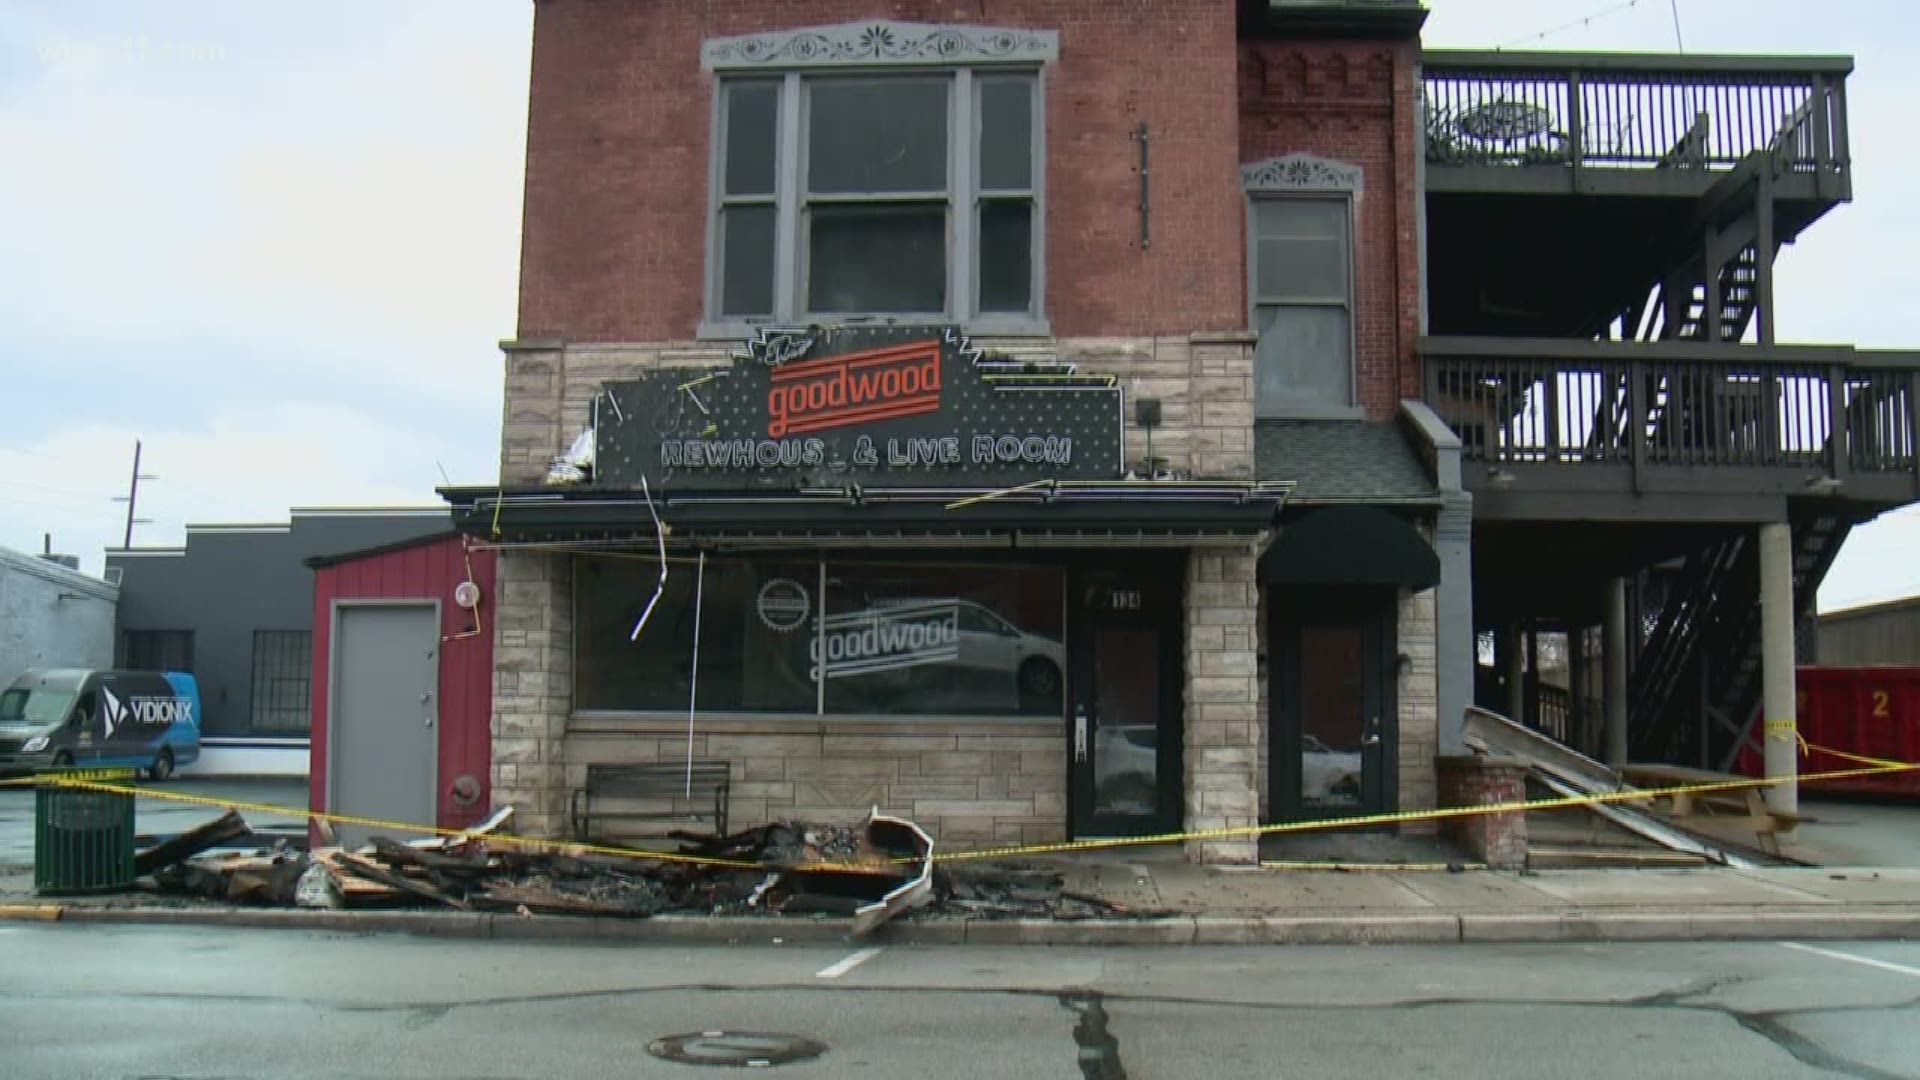 Goodwood is working to rebuild after a fire damaged the building where they planned to open a new restaurant on March 8.